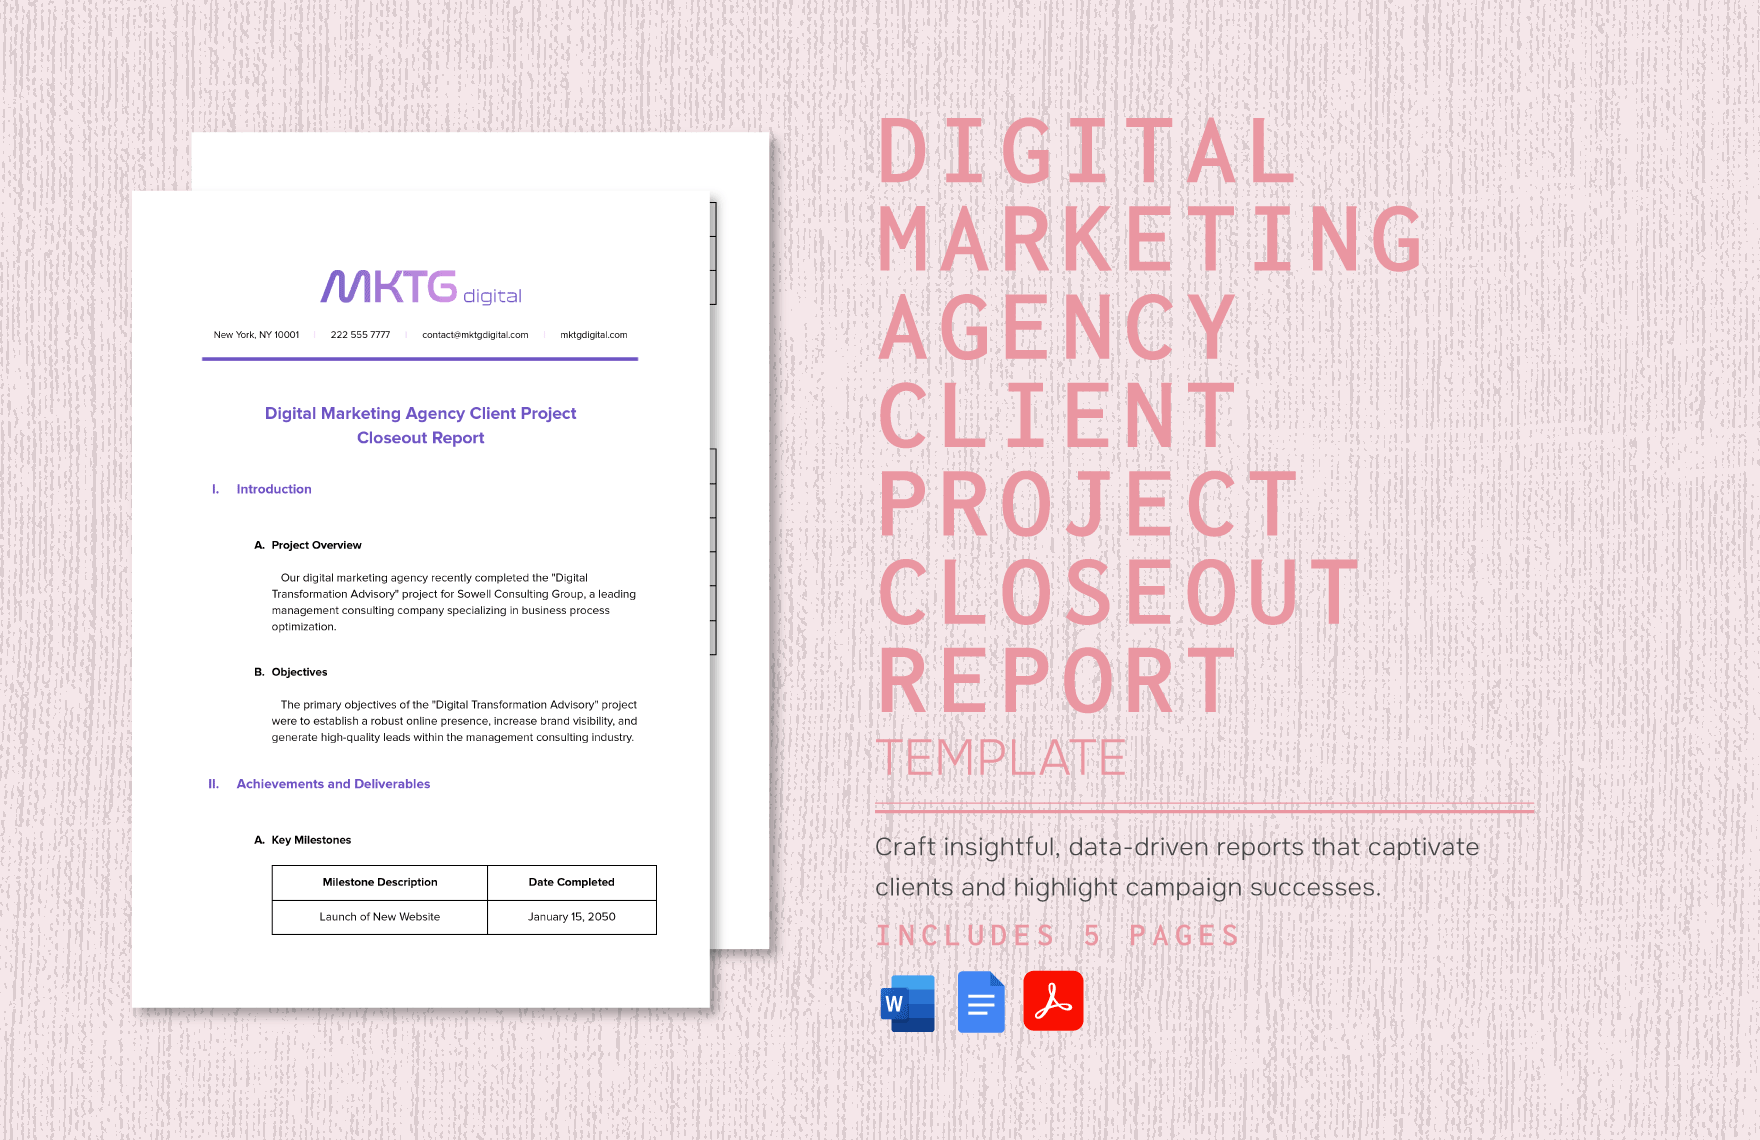 Digital Marketing Agency Client Project Closeout Report Template